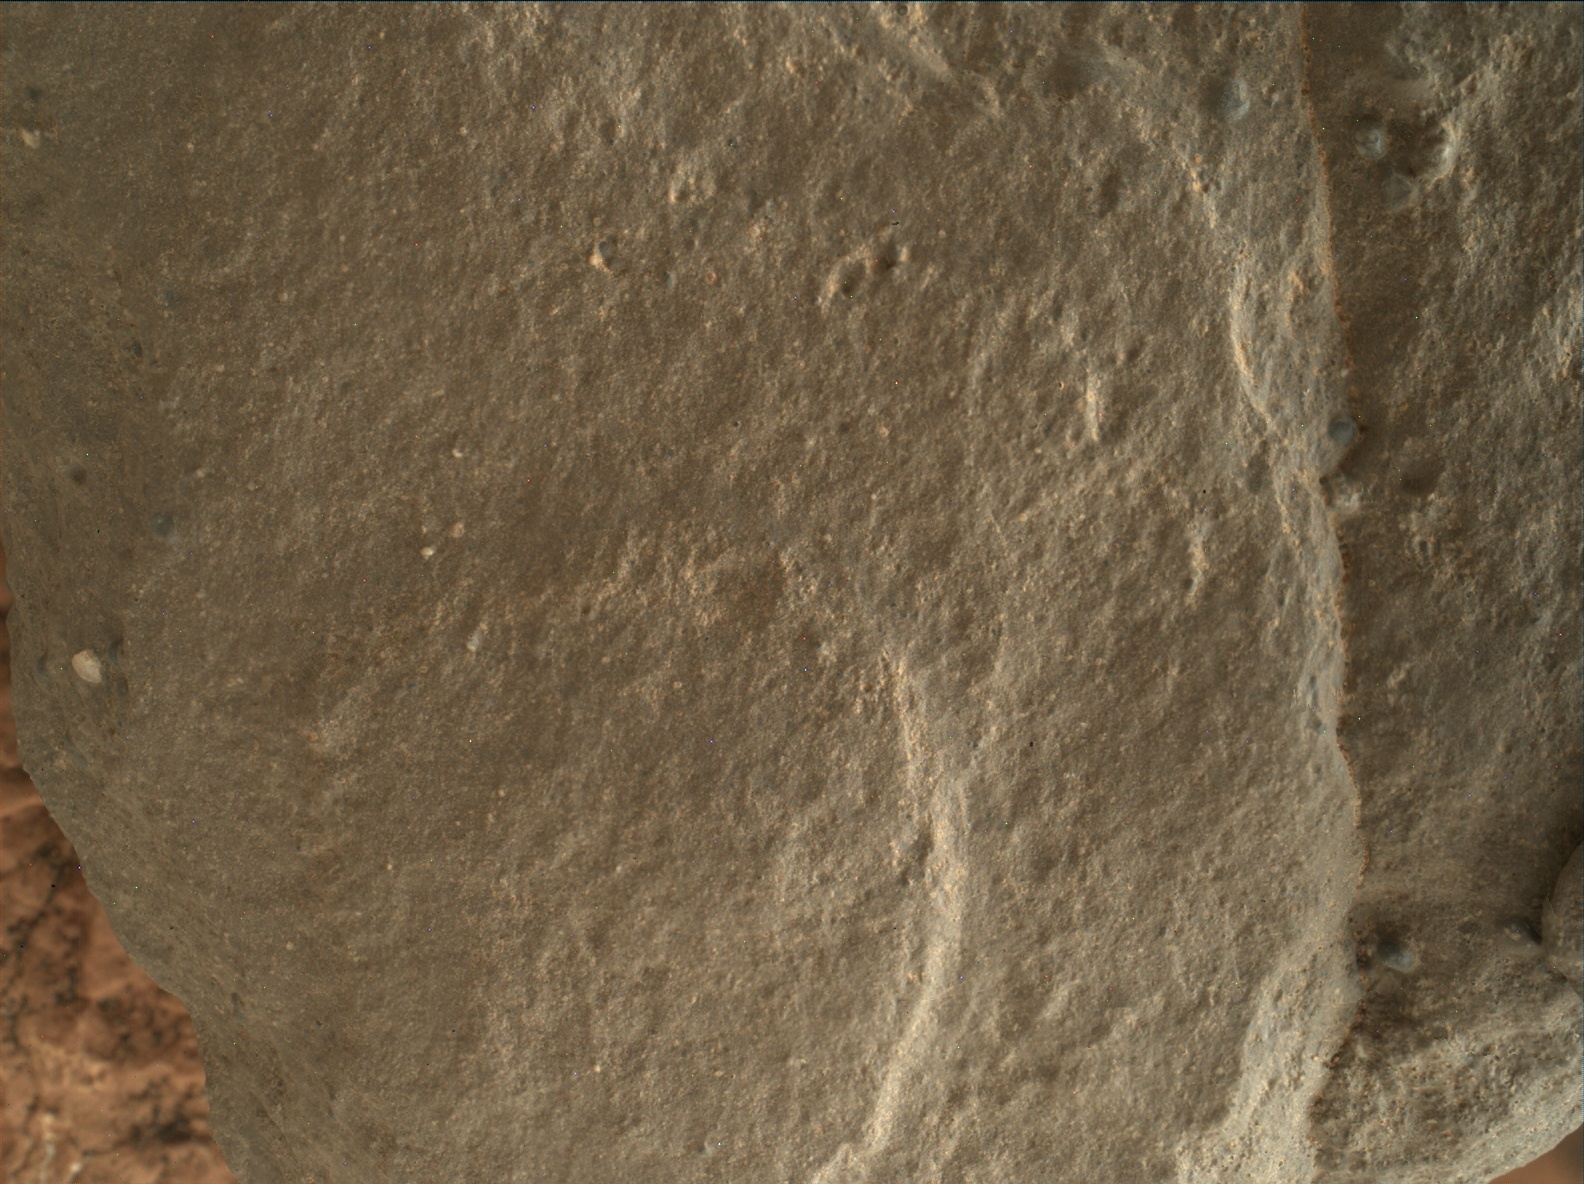 Nasa's Mars rover Curiosity acquired this image using its Mars Hand Lens Imager (MAHLI) on Sol 1610